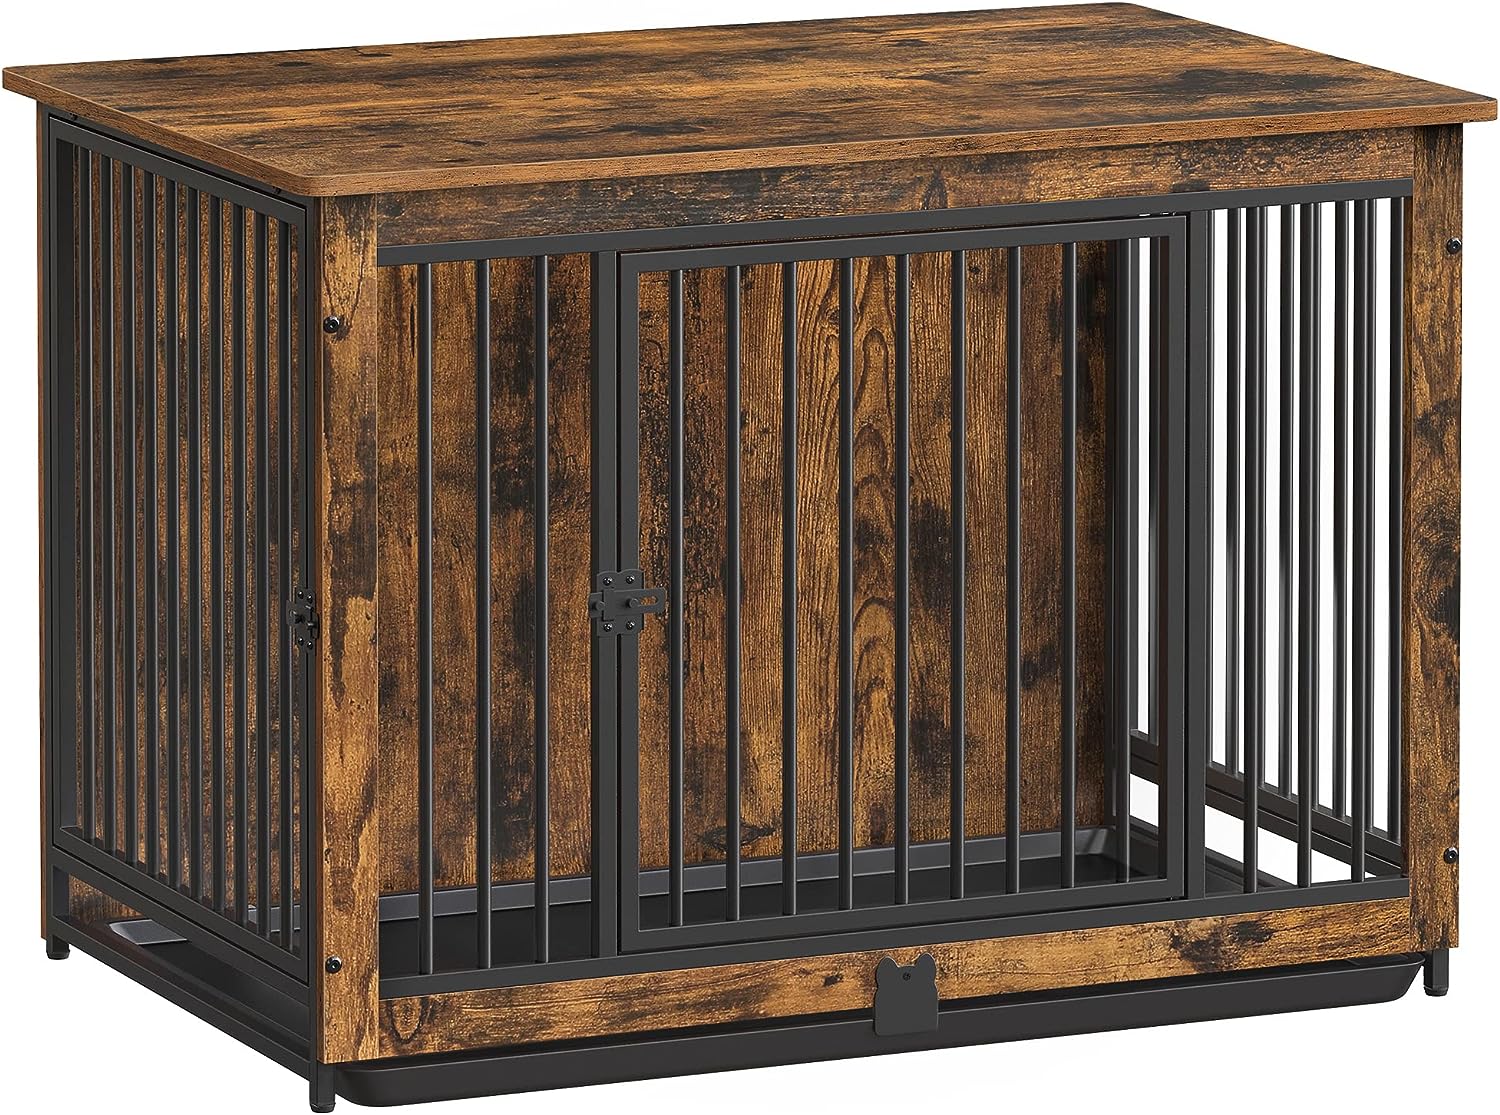 FEANDREA Dog Crate End Table - Rustic Brown